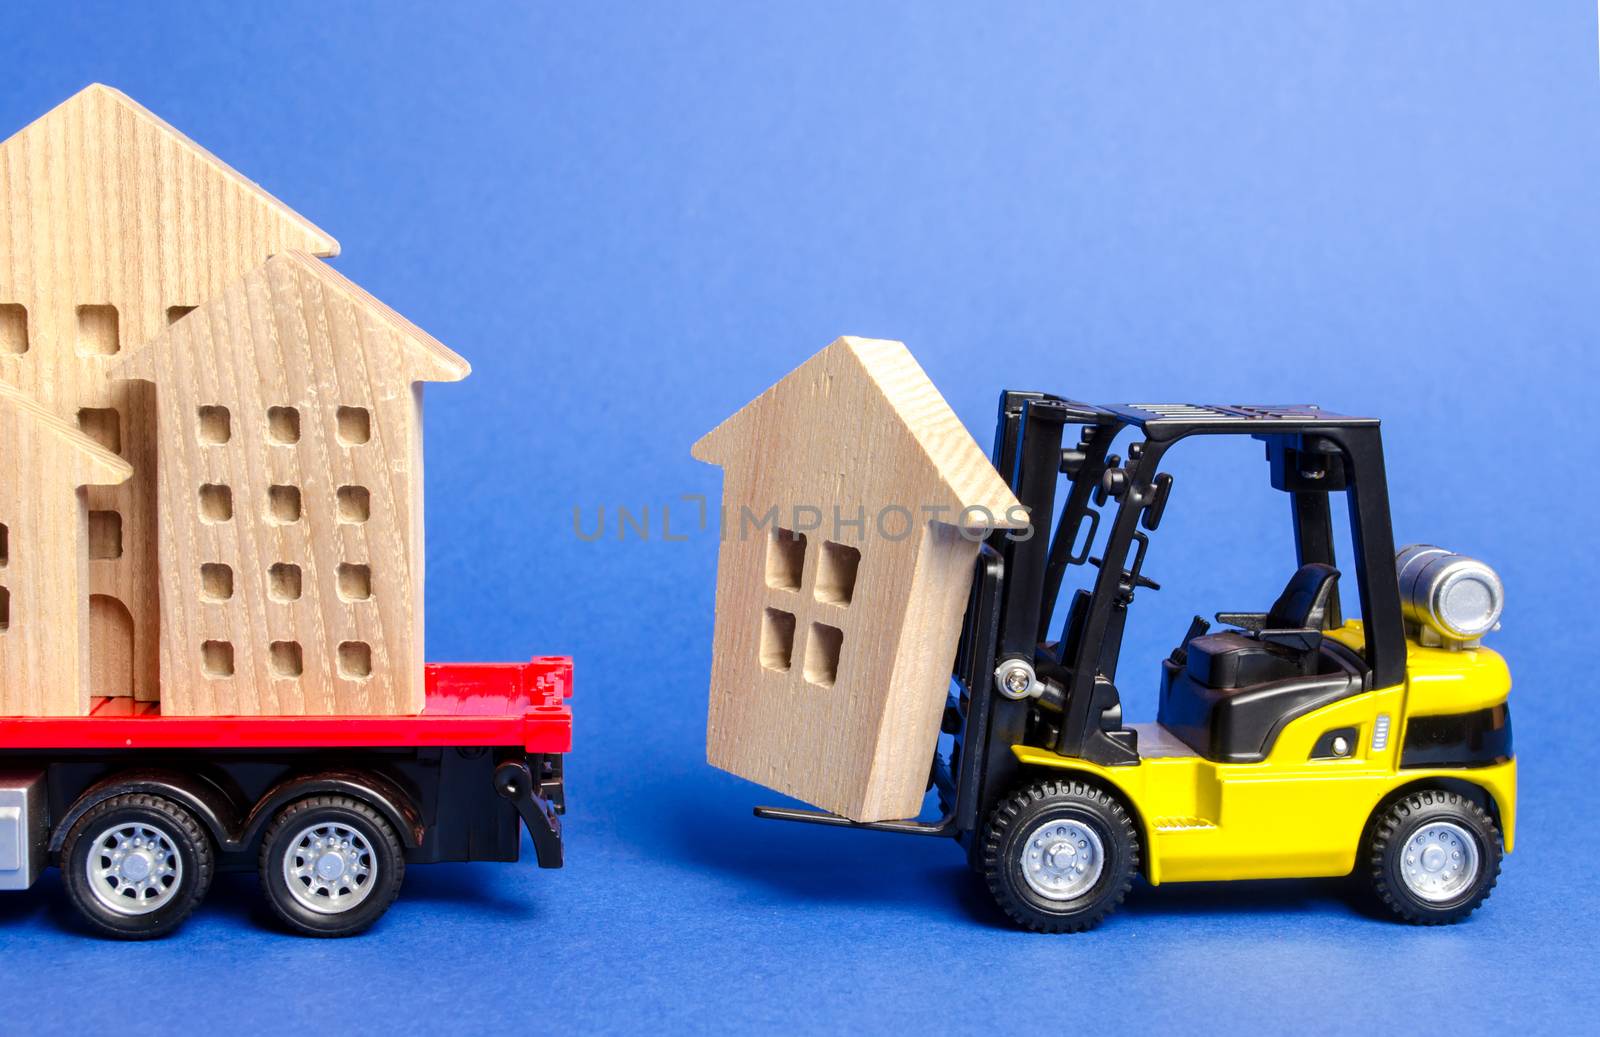 A yellow forklift loads a wooden figure of a house into a truck. Concept of transportation and cargo shipping, moving company. Construction of new houses and objects. Industry. Move entire buildings. by iLixe48